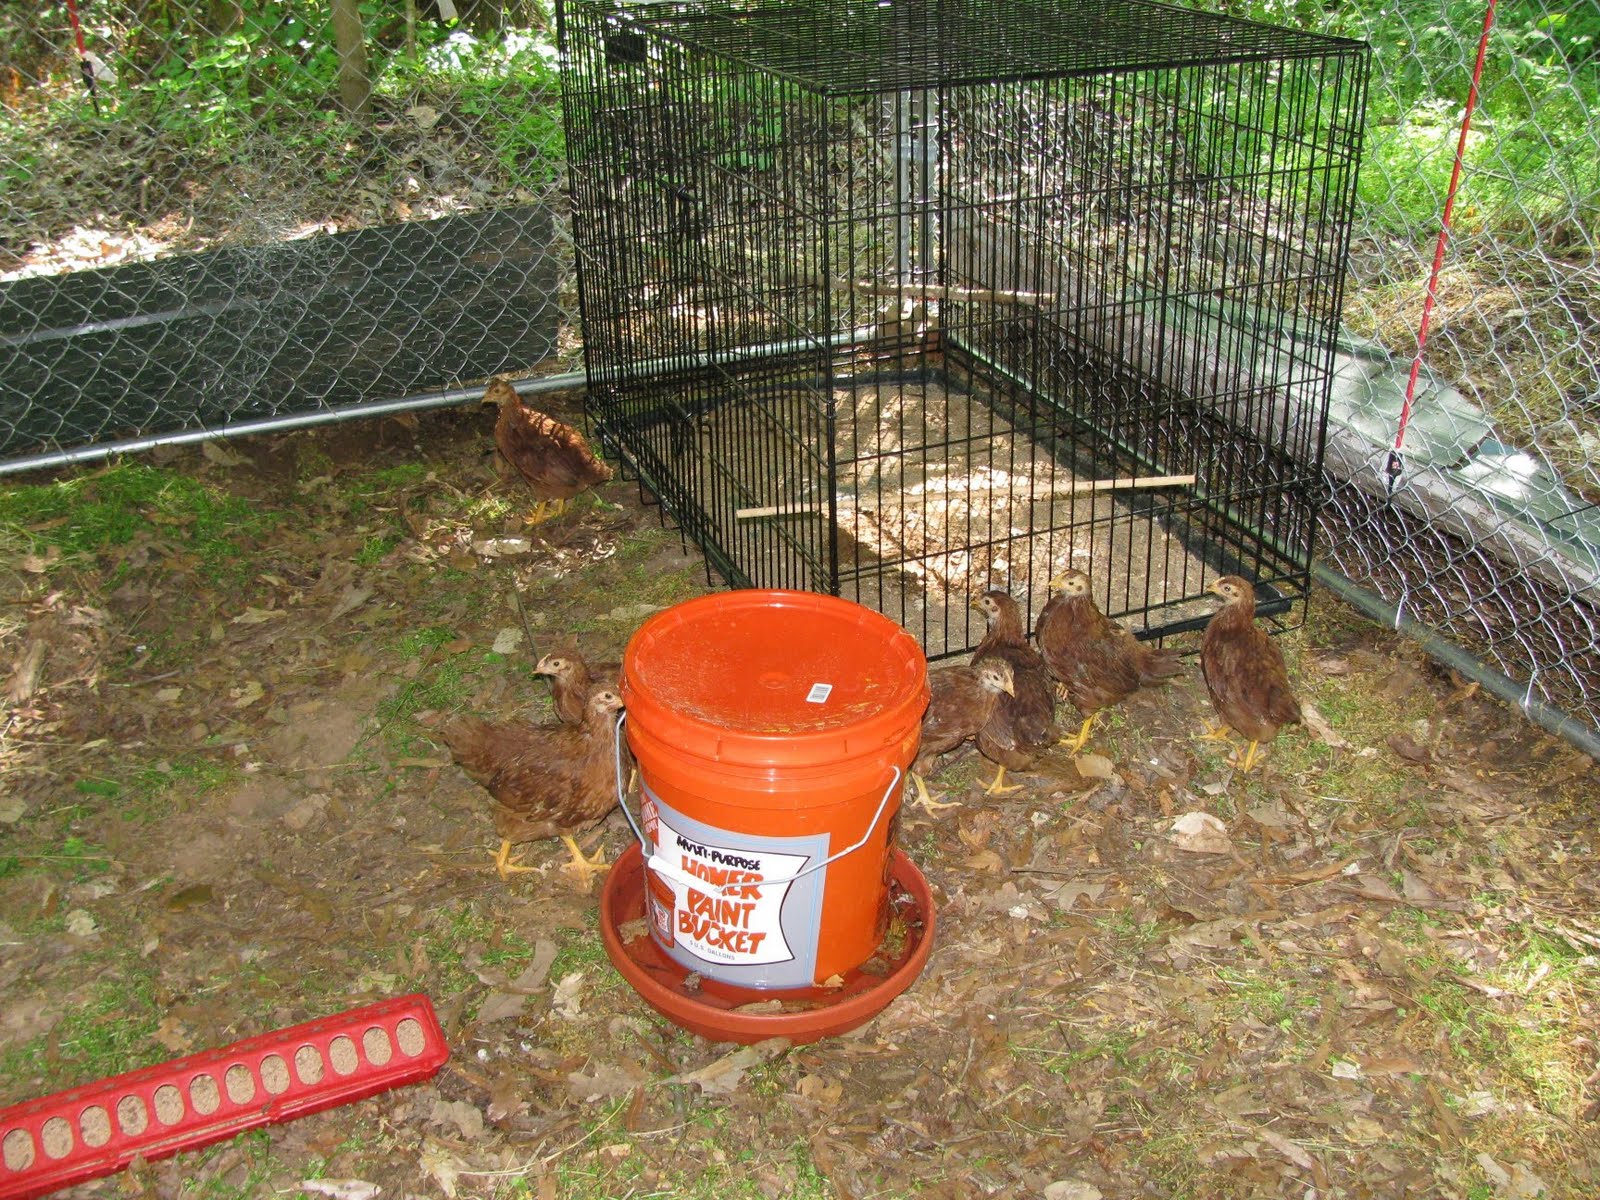 made some feeders and waters from Home Depot buckets.